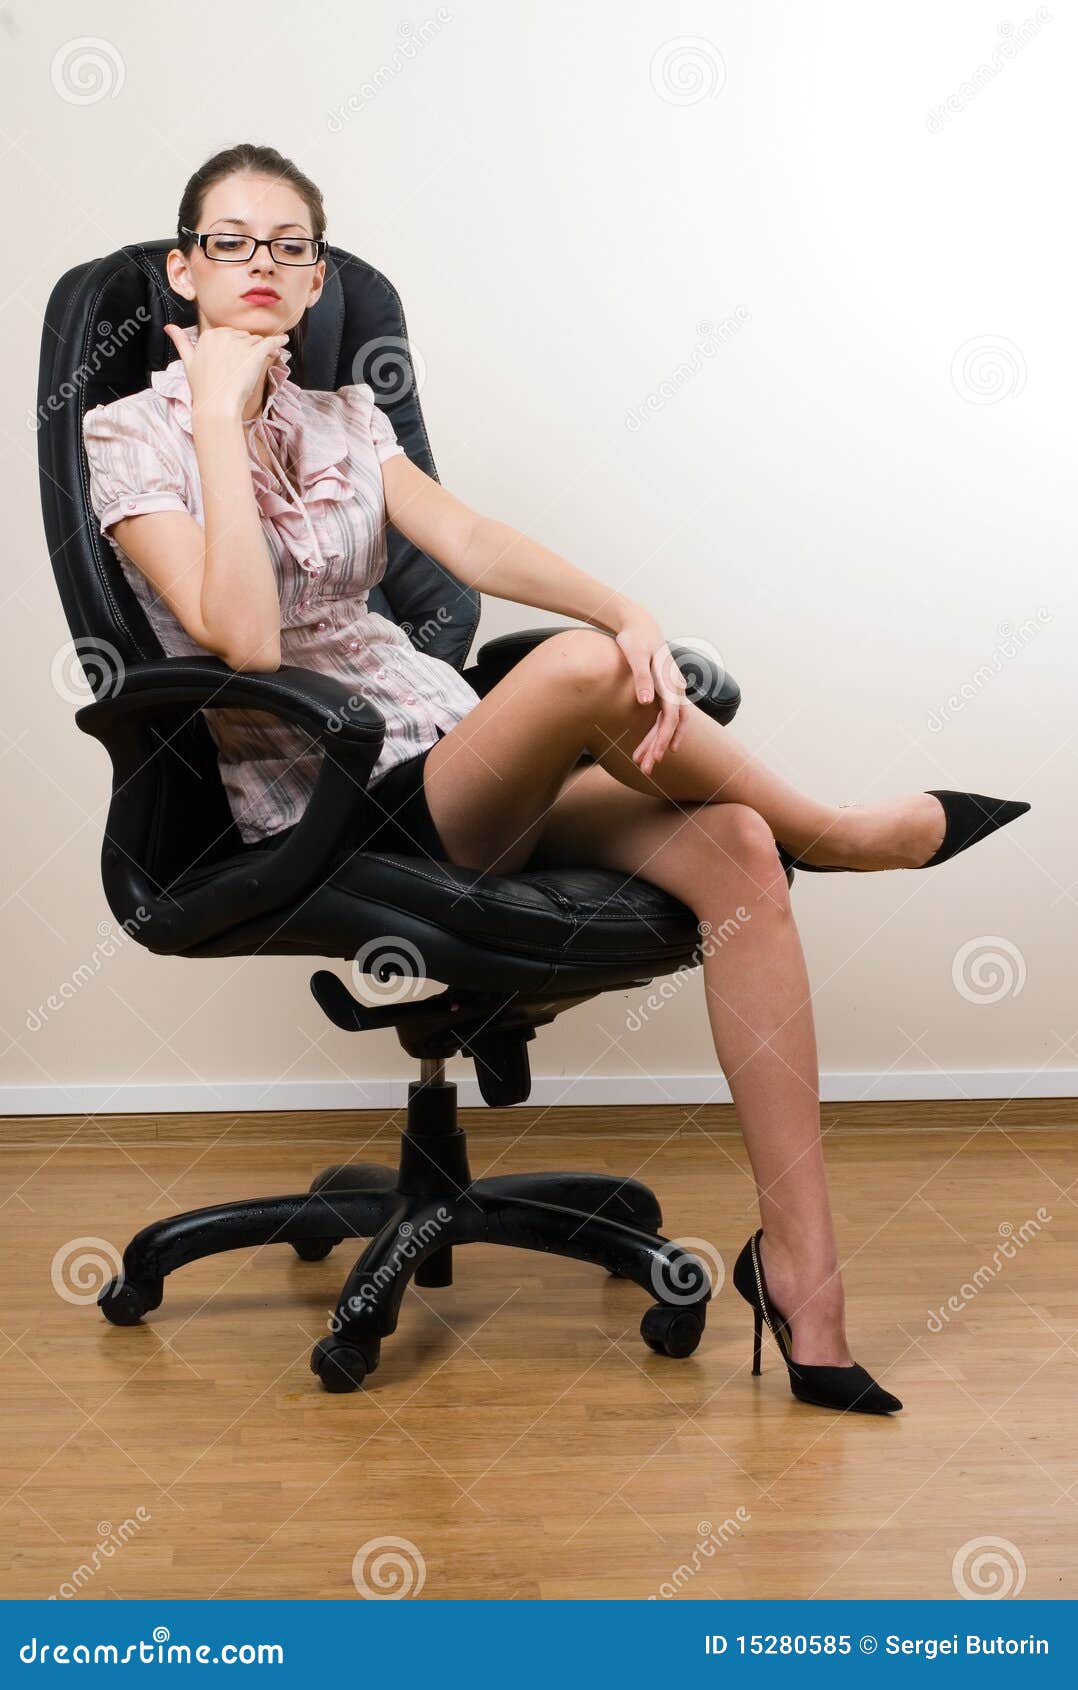 Lady Boss In Office Stock Image Image Of Desk Mail 15280585 